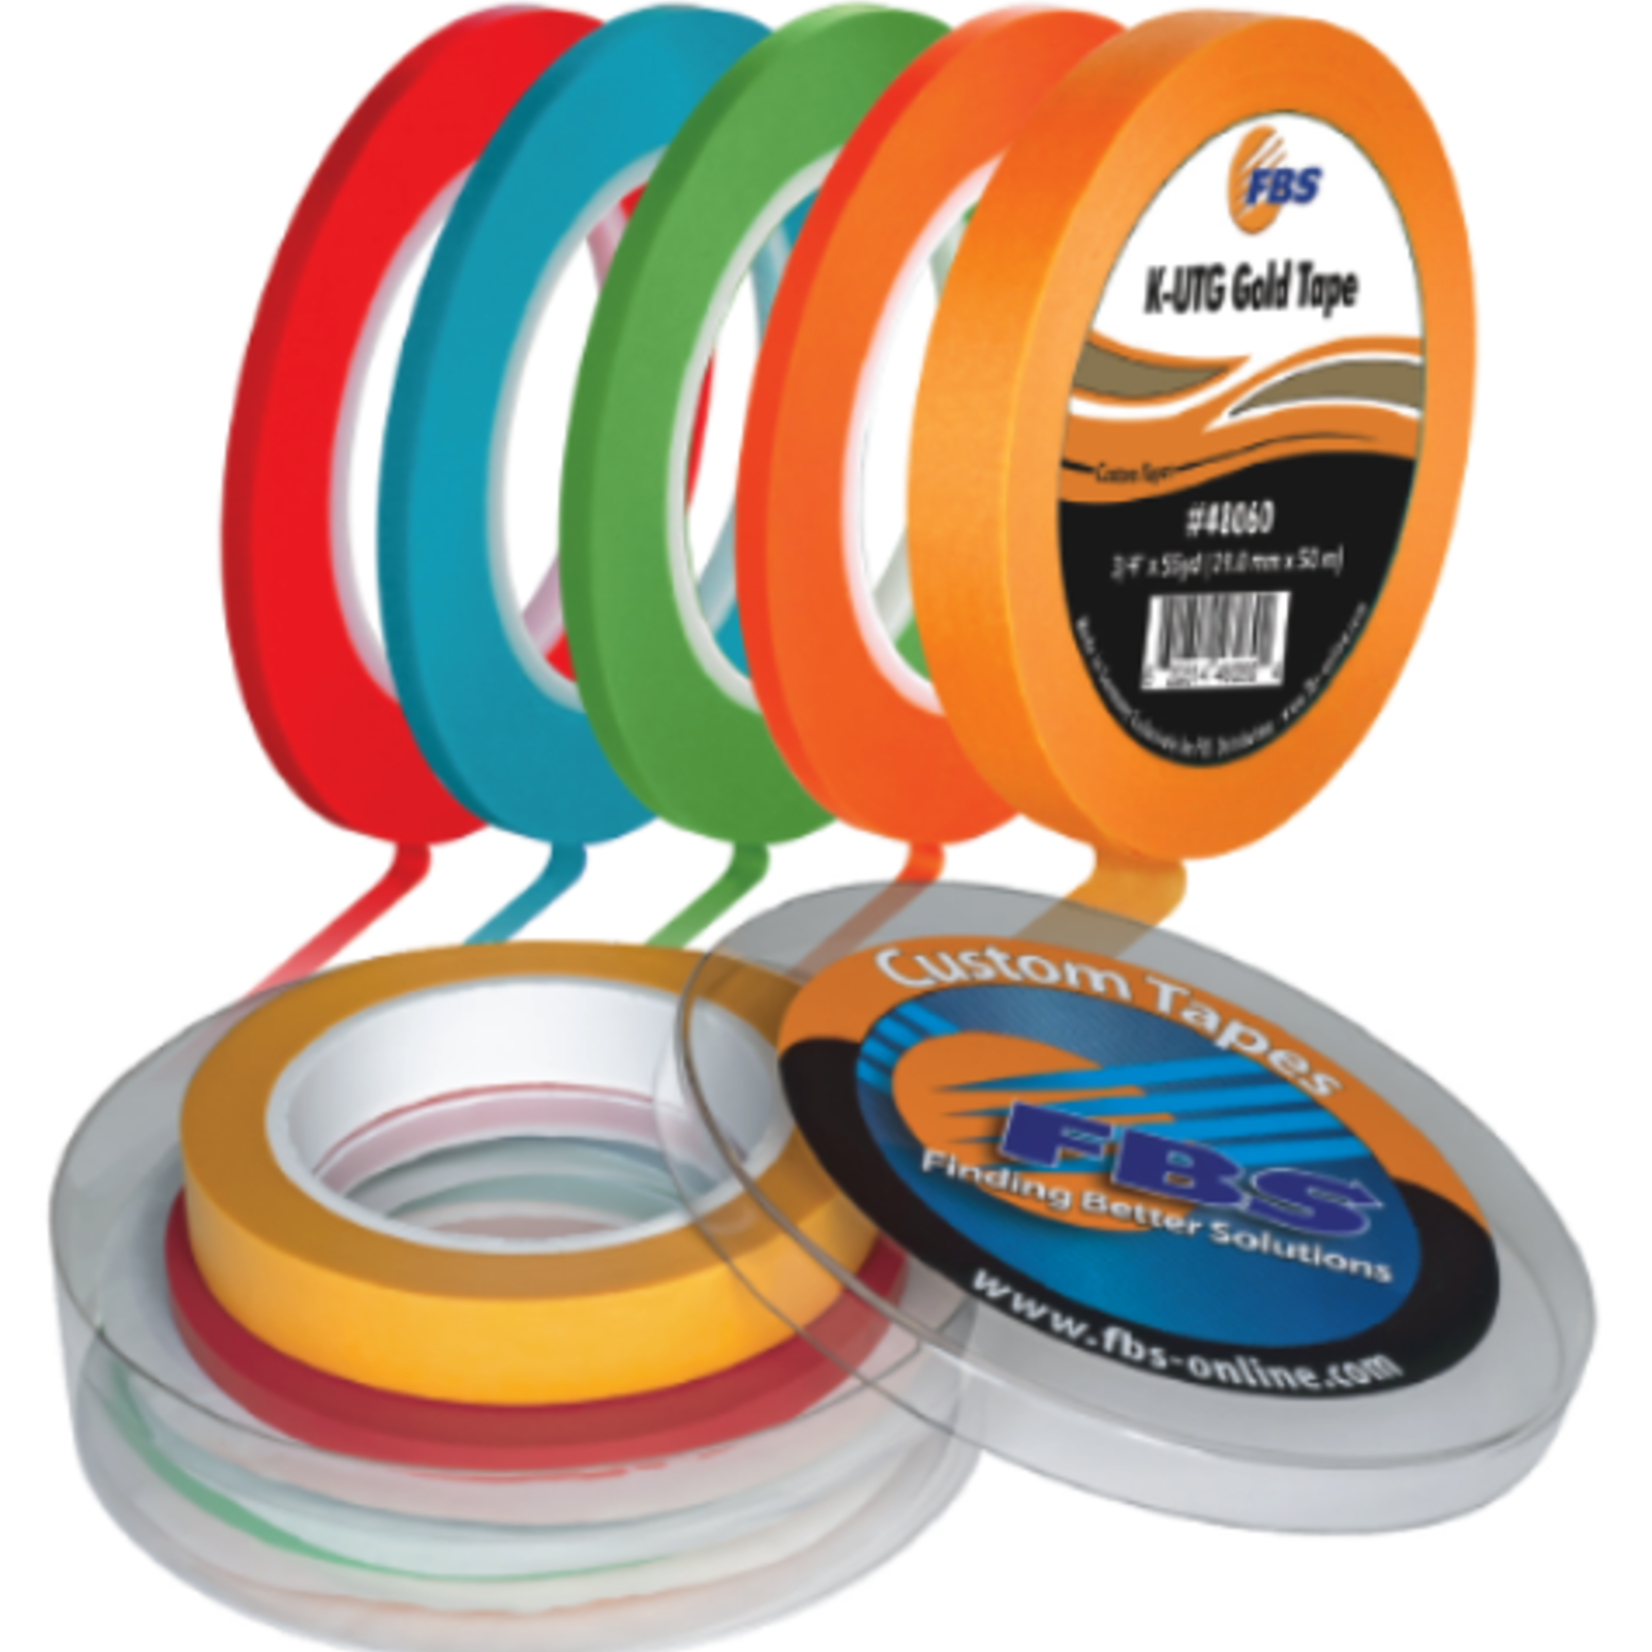 FBS Distribution FBS-48060 K-UTG Gold Tape - 0.75 in. x 55 Yards